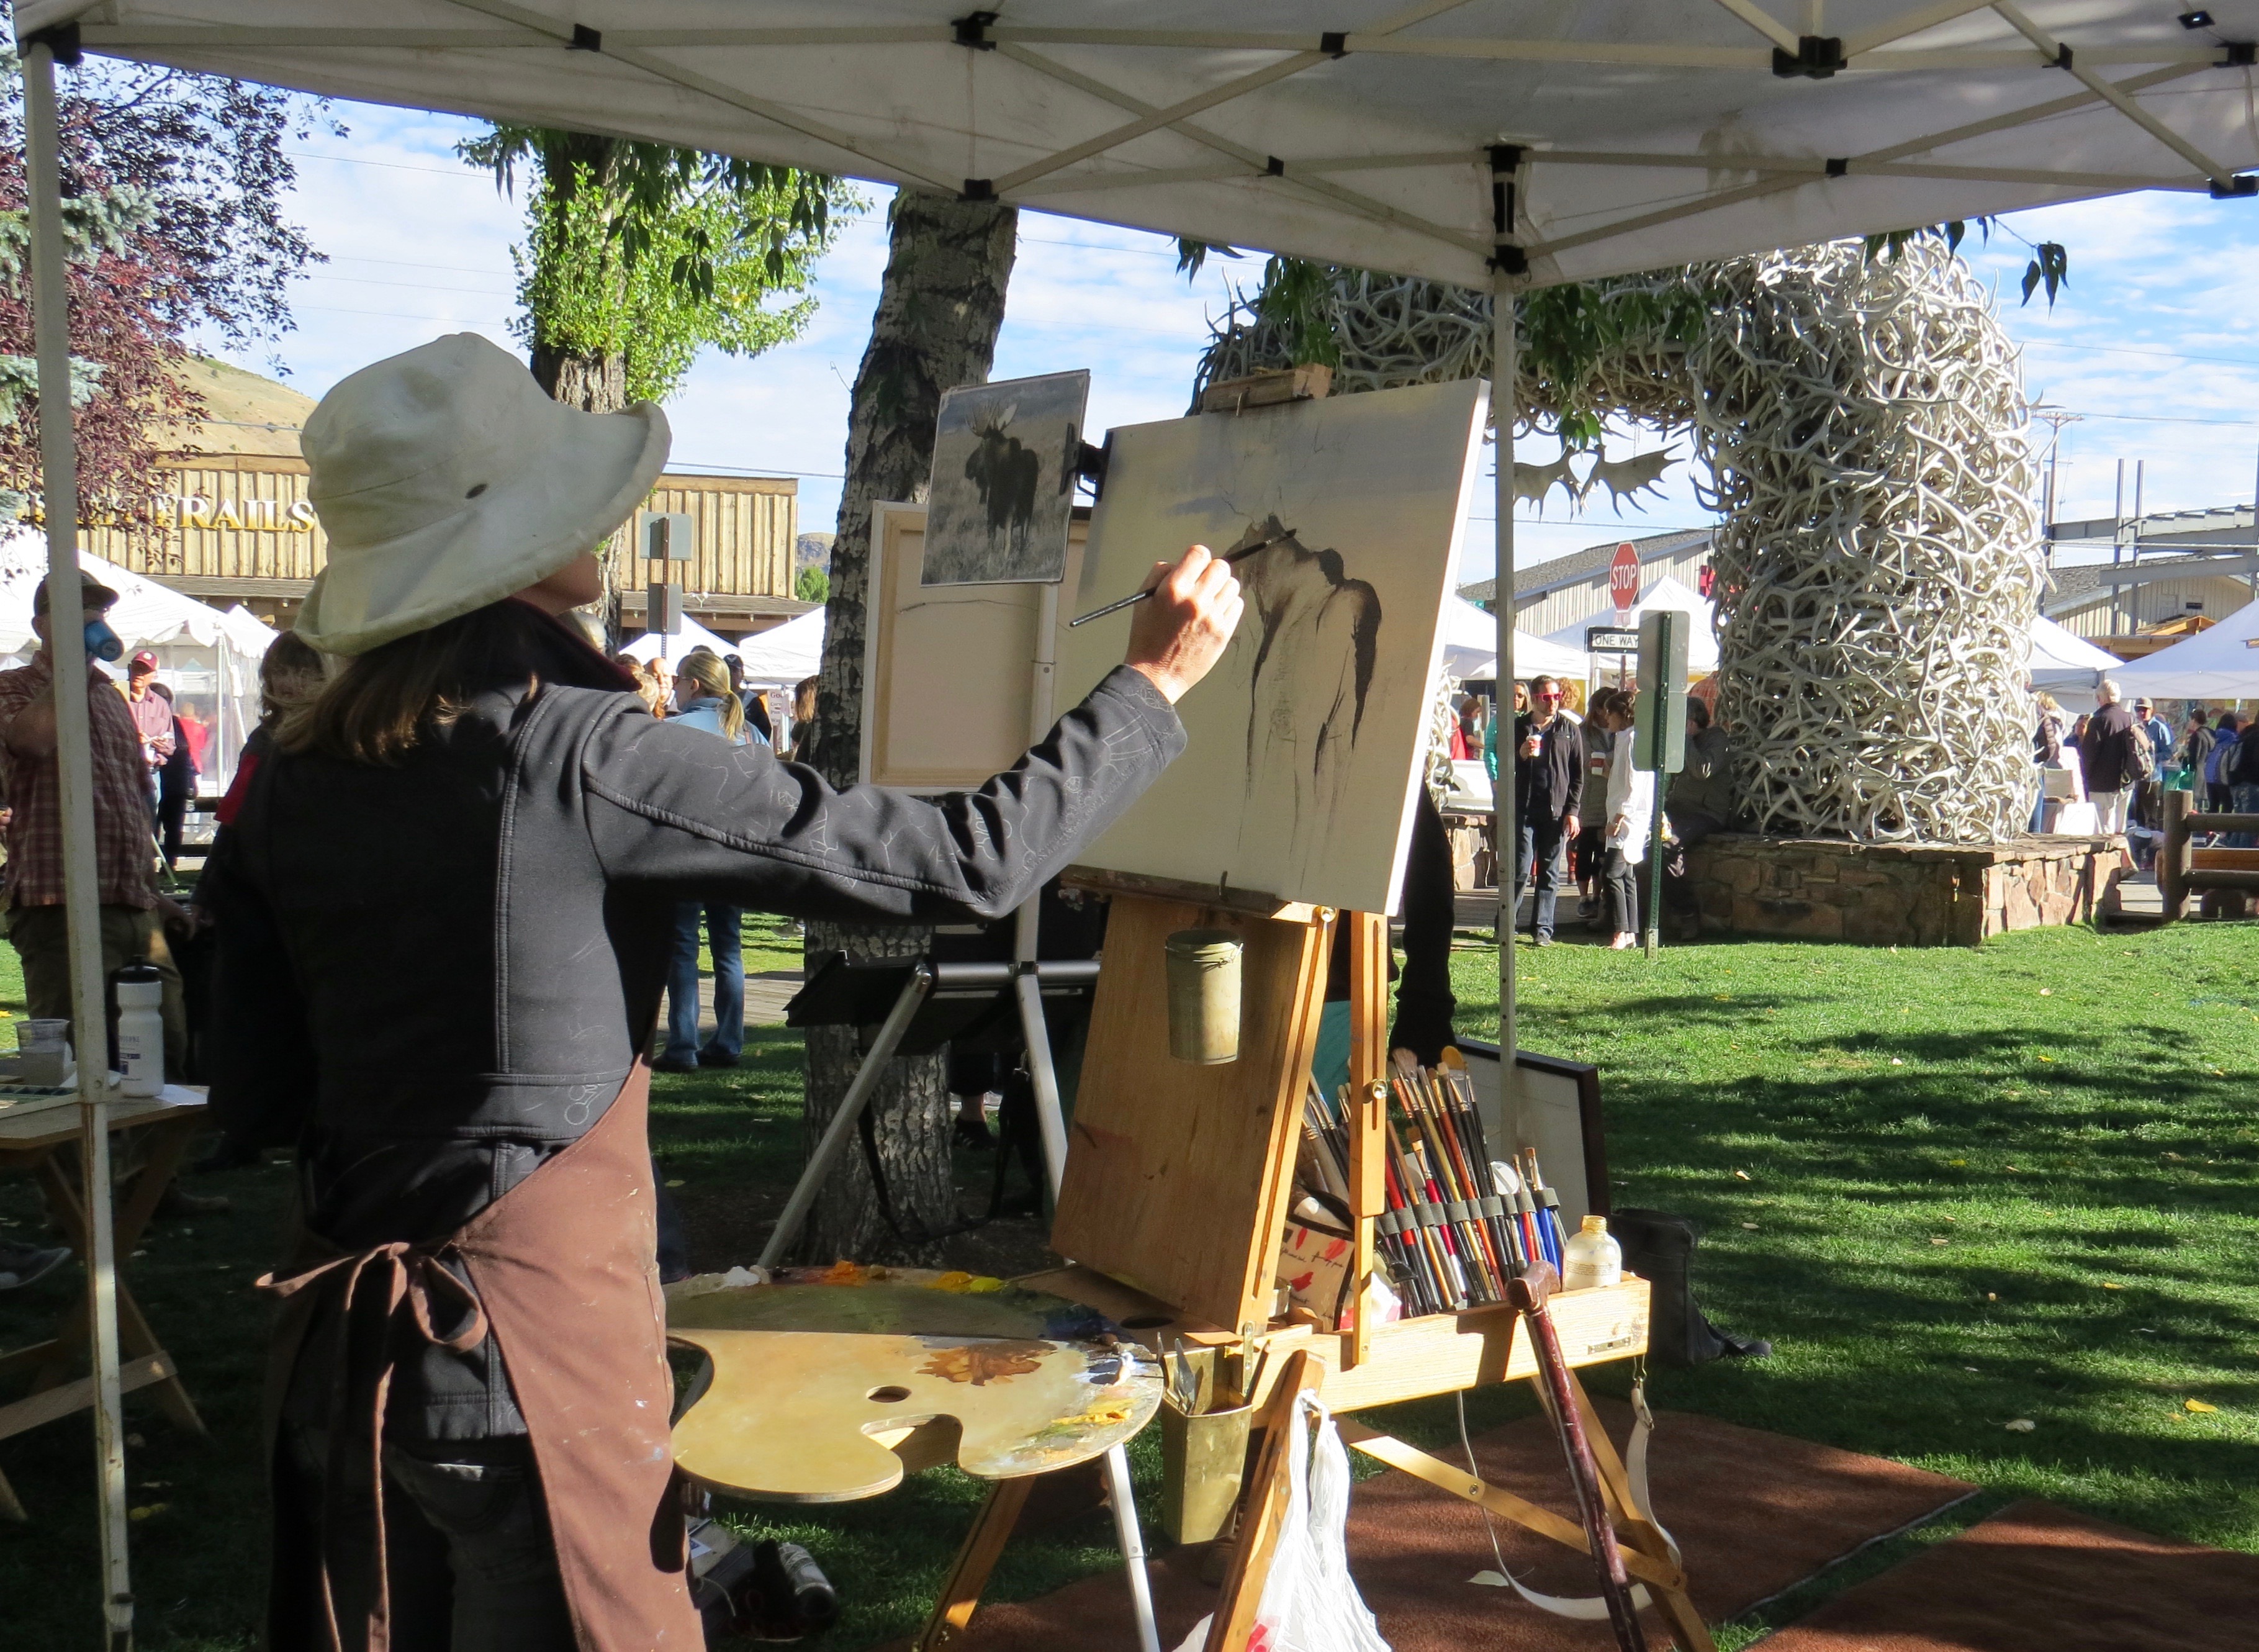 The annual Fall Arts Festival QuickDraw is a highly popular event where dozens of talented artists have 90 minutes to complete their masterpieces as spectators watch.